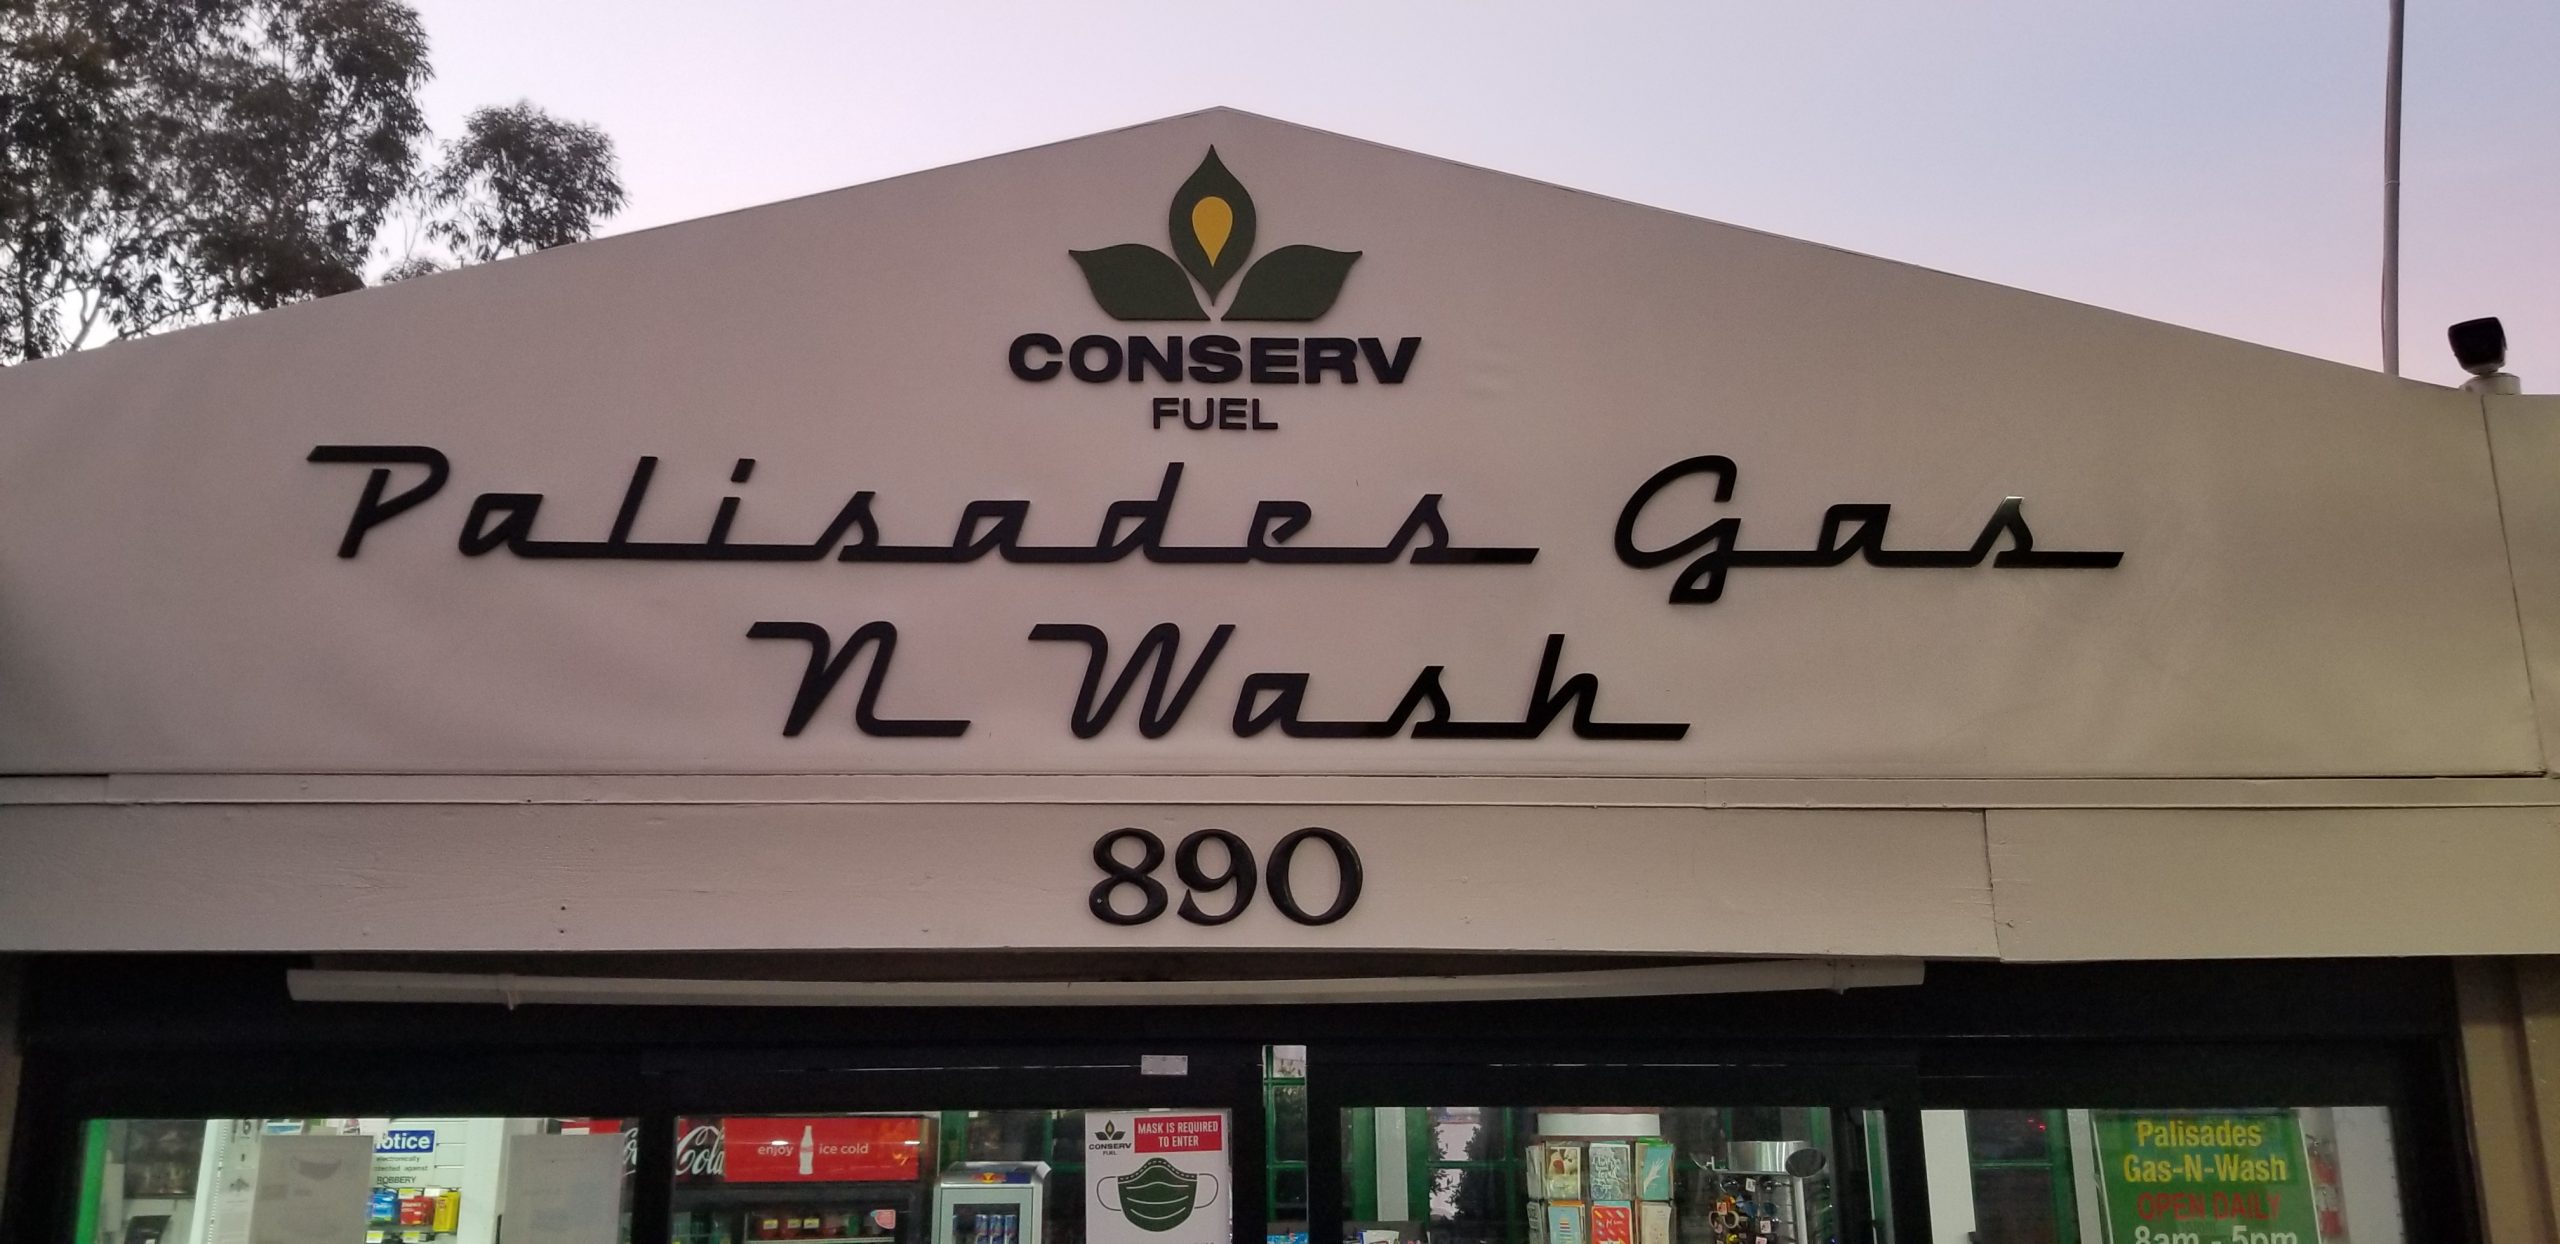 These are the custom dimensional letters sign made for Palisades Gas N Wash located at Conserv Fuel in the Pacific Palisades.